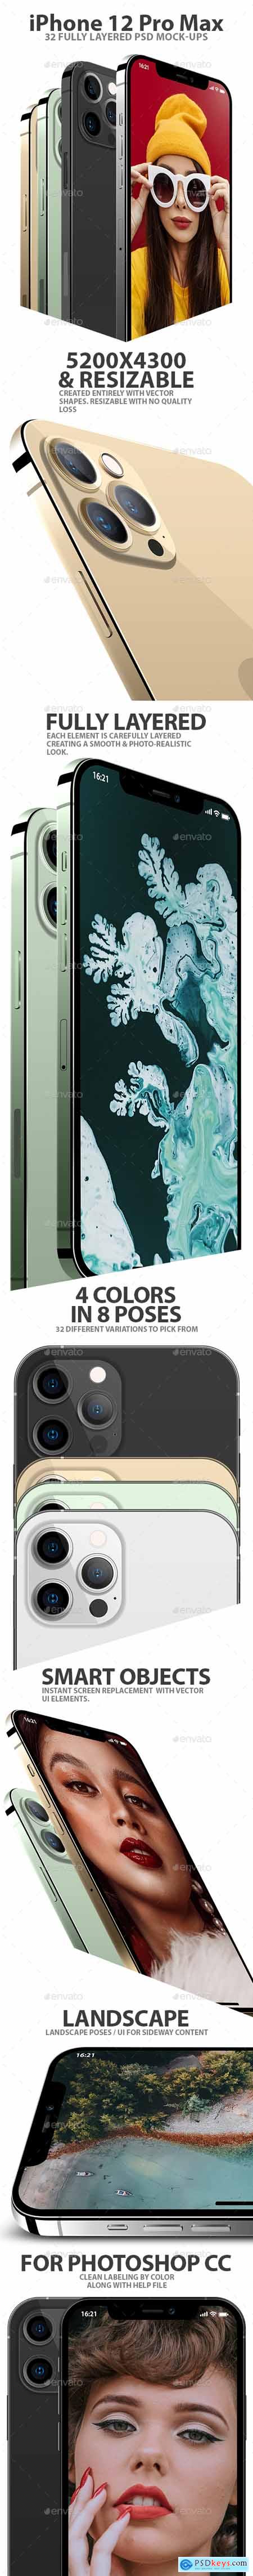 iPhone 12 Pro Layered PSD Mock-ups in 4 Colors 28986984